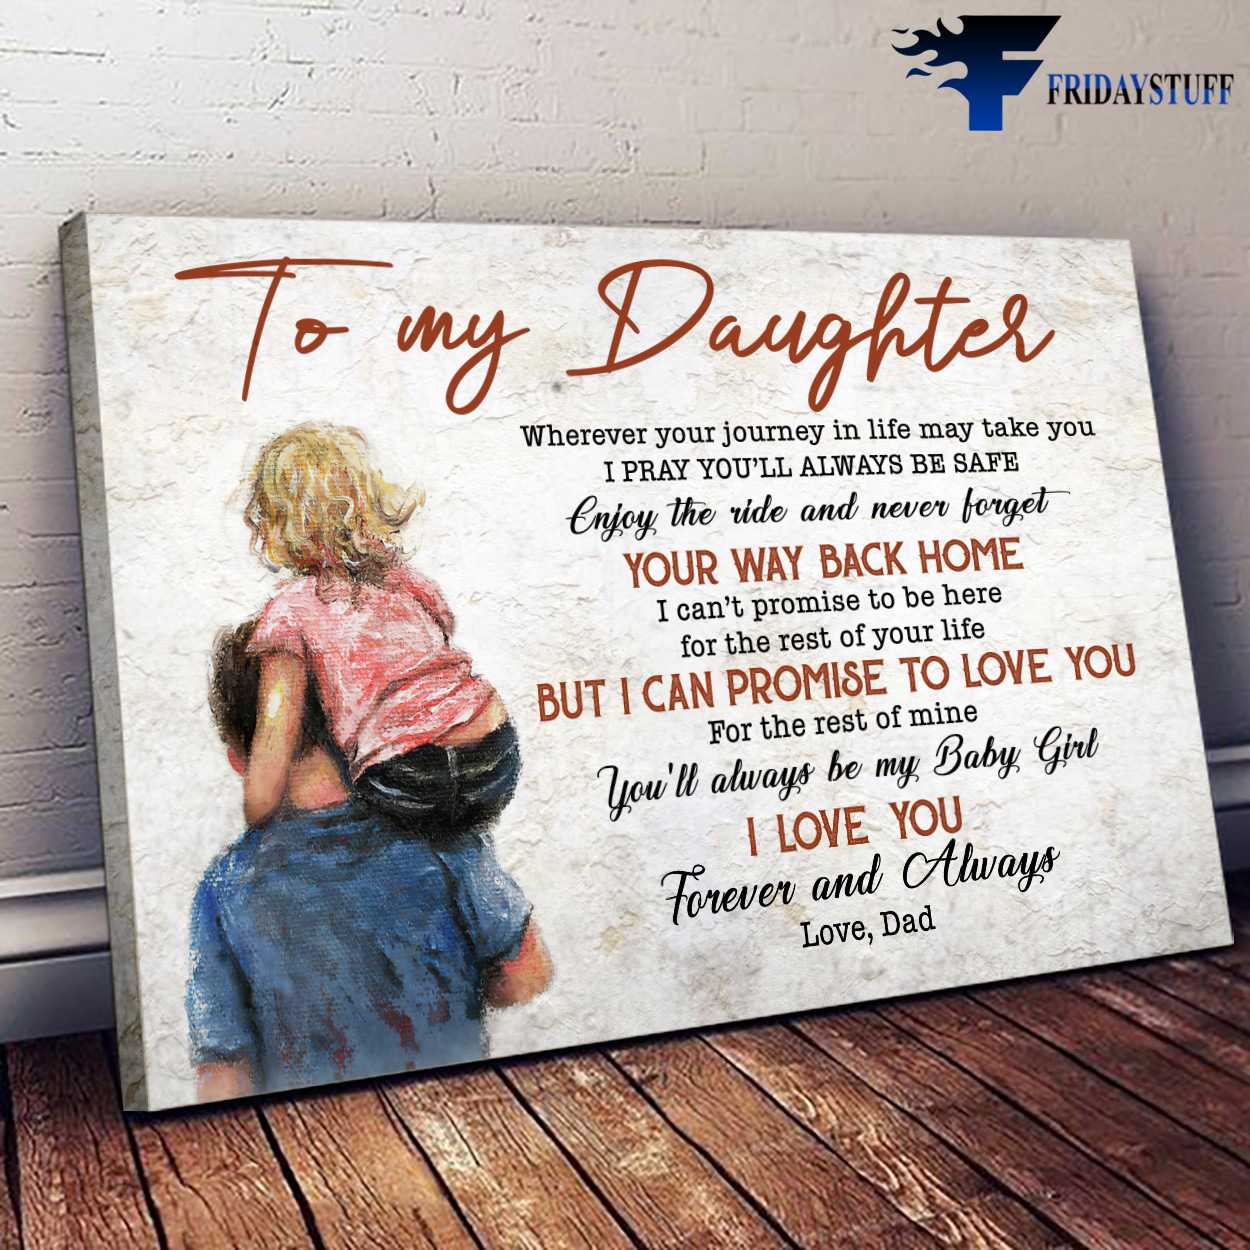 Dad And Daughter, Gift For Daughter, To My Daughter, Wherever Your Journey In Life May Take You, I Pray You'll Always Be Safe, Enjoy The Ride And Never Forget, Your Way Back Home